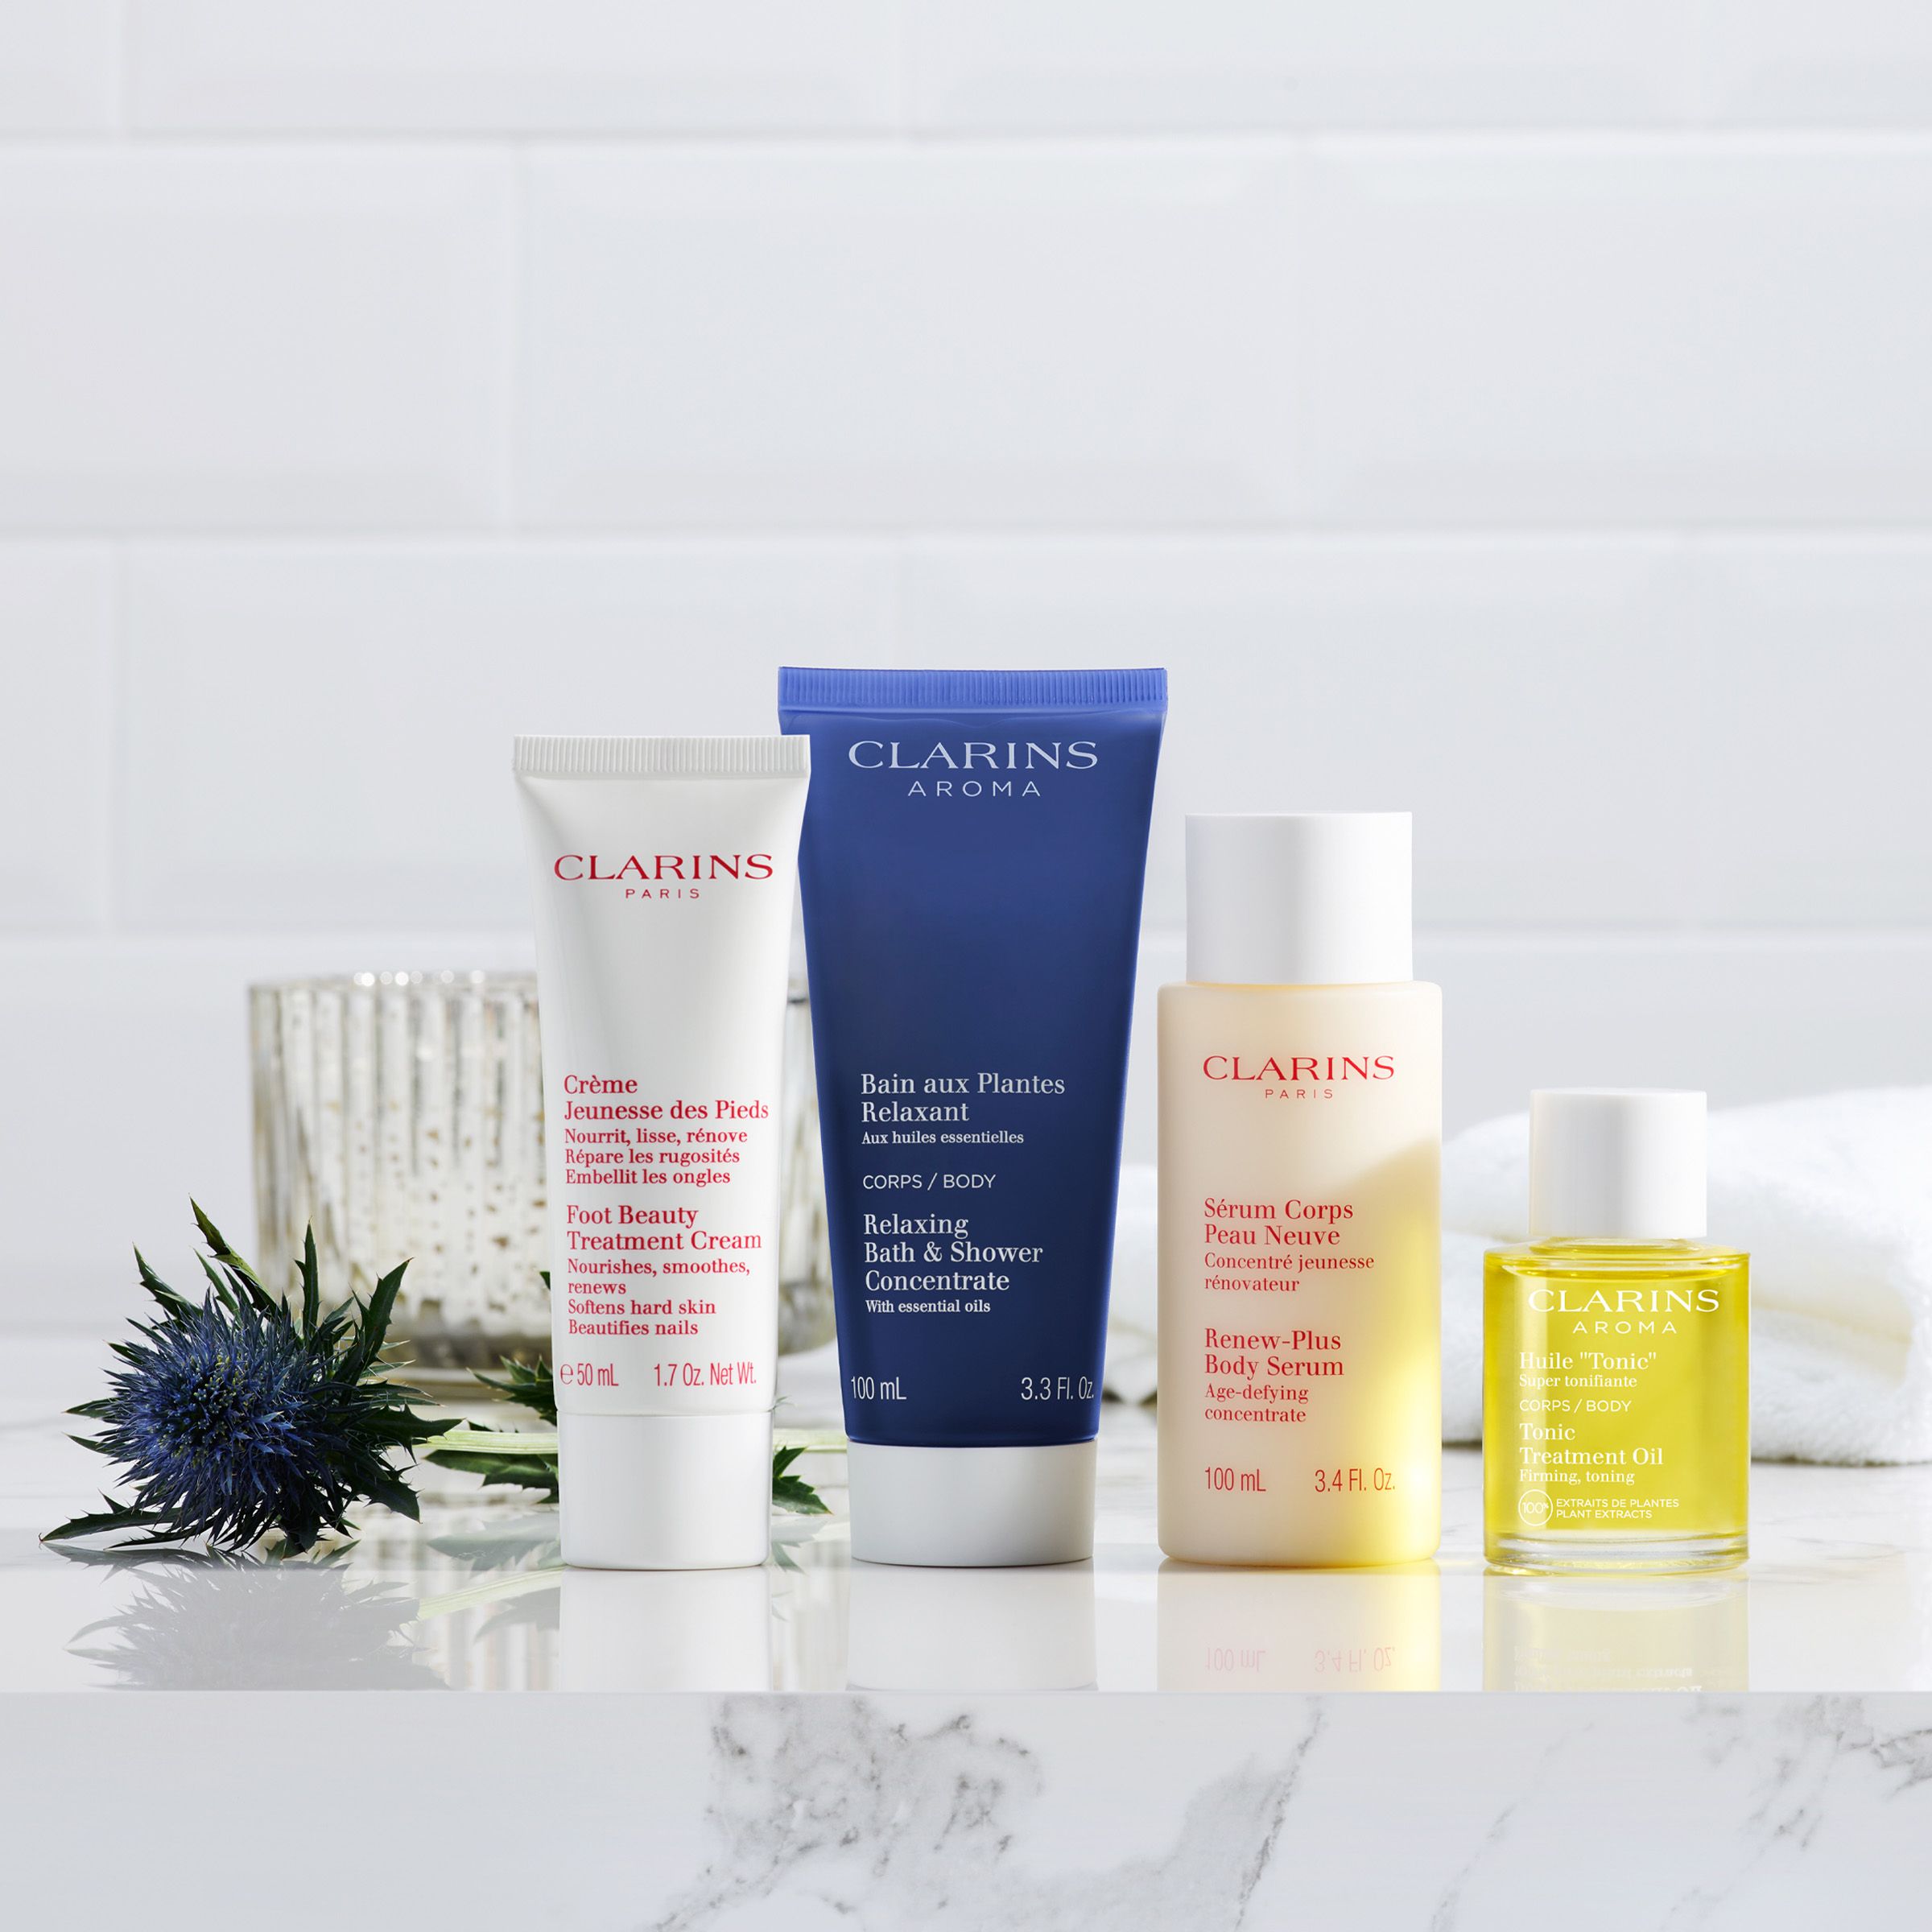 Clarins products on a counter